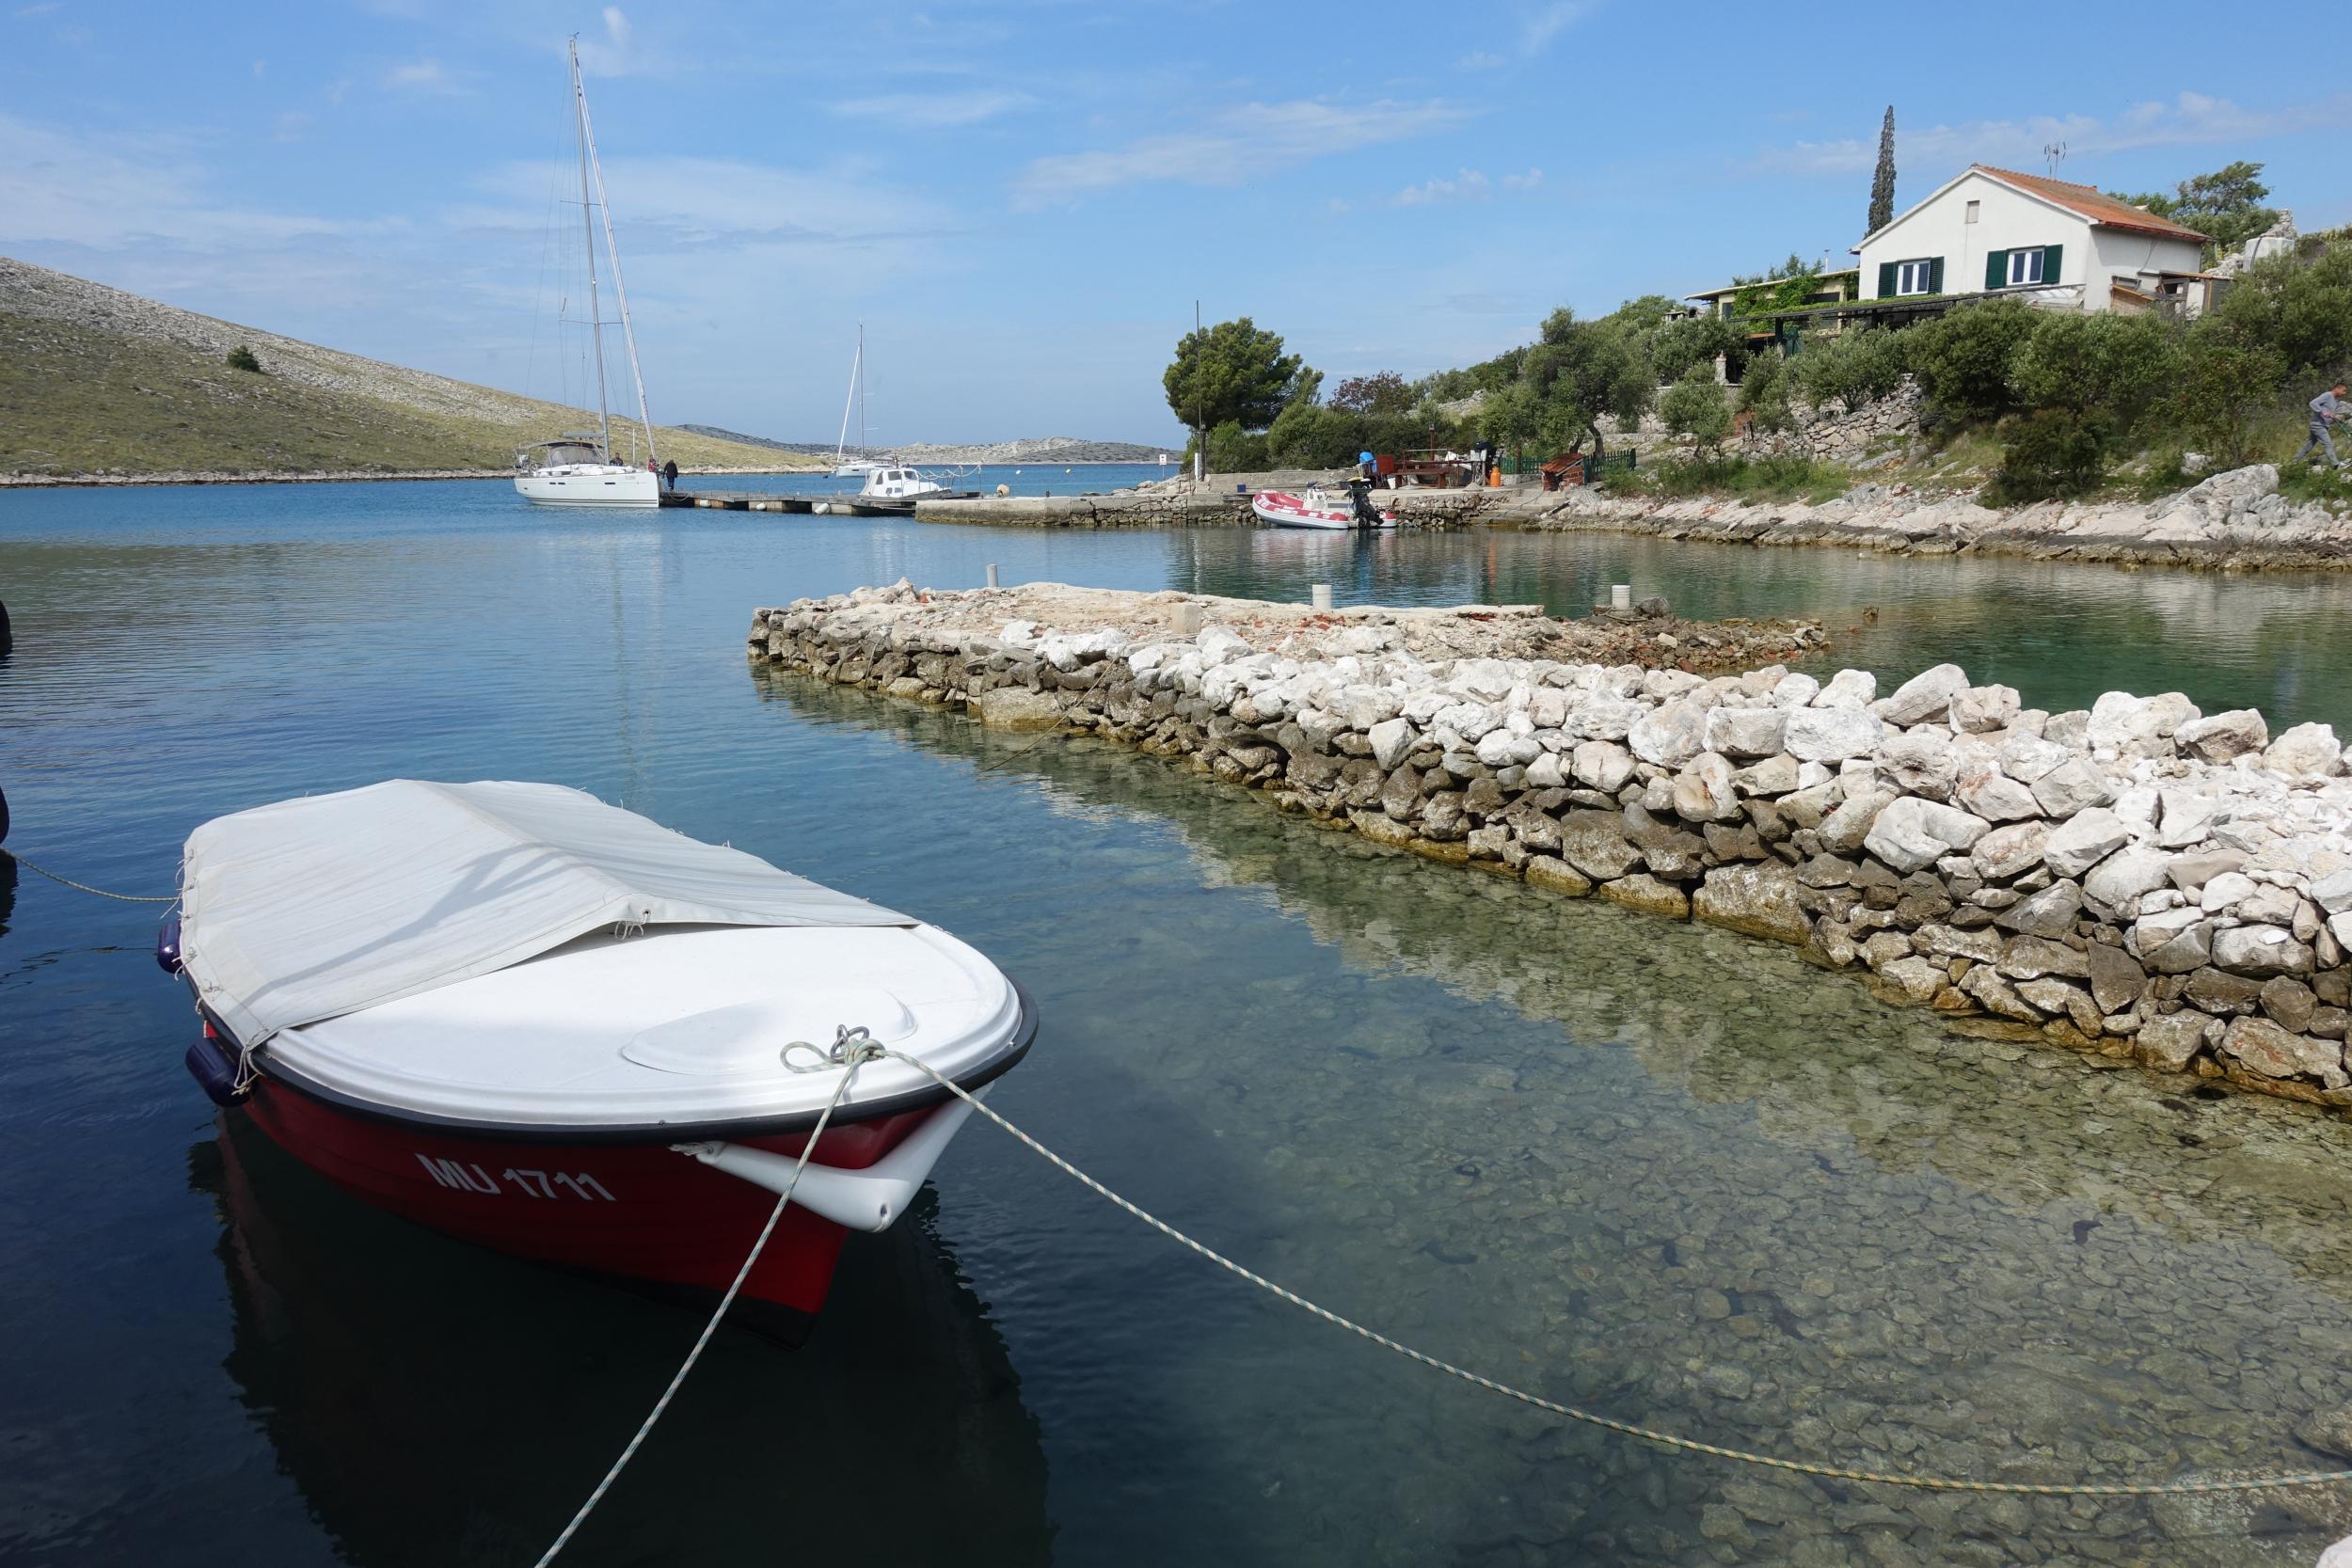 The Kornati Islands are ideal for getting away from it all